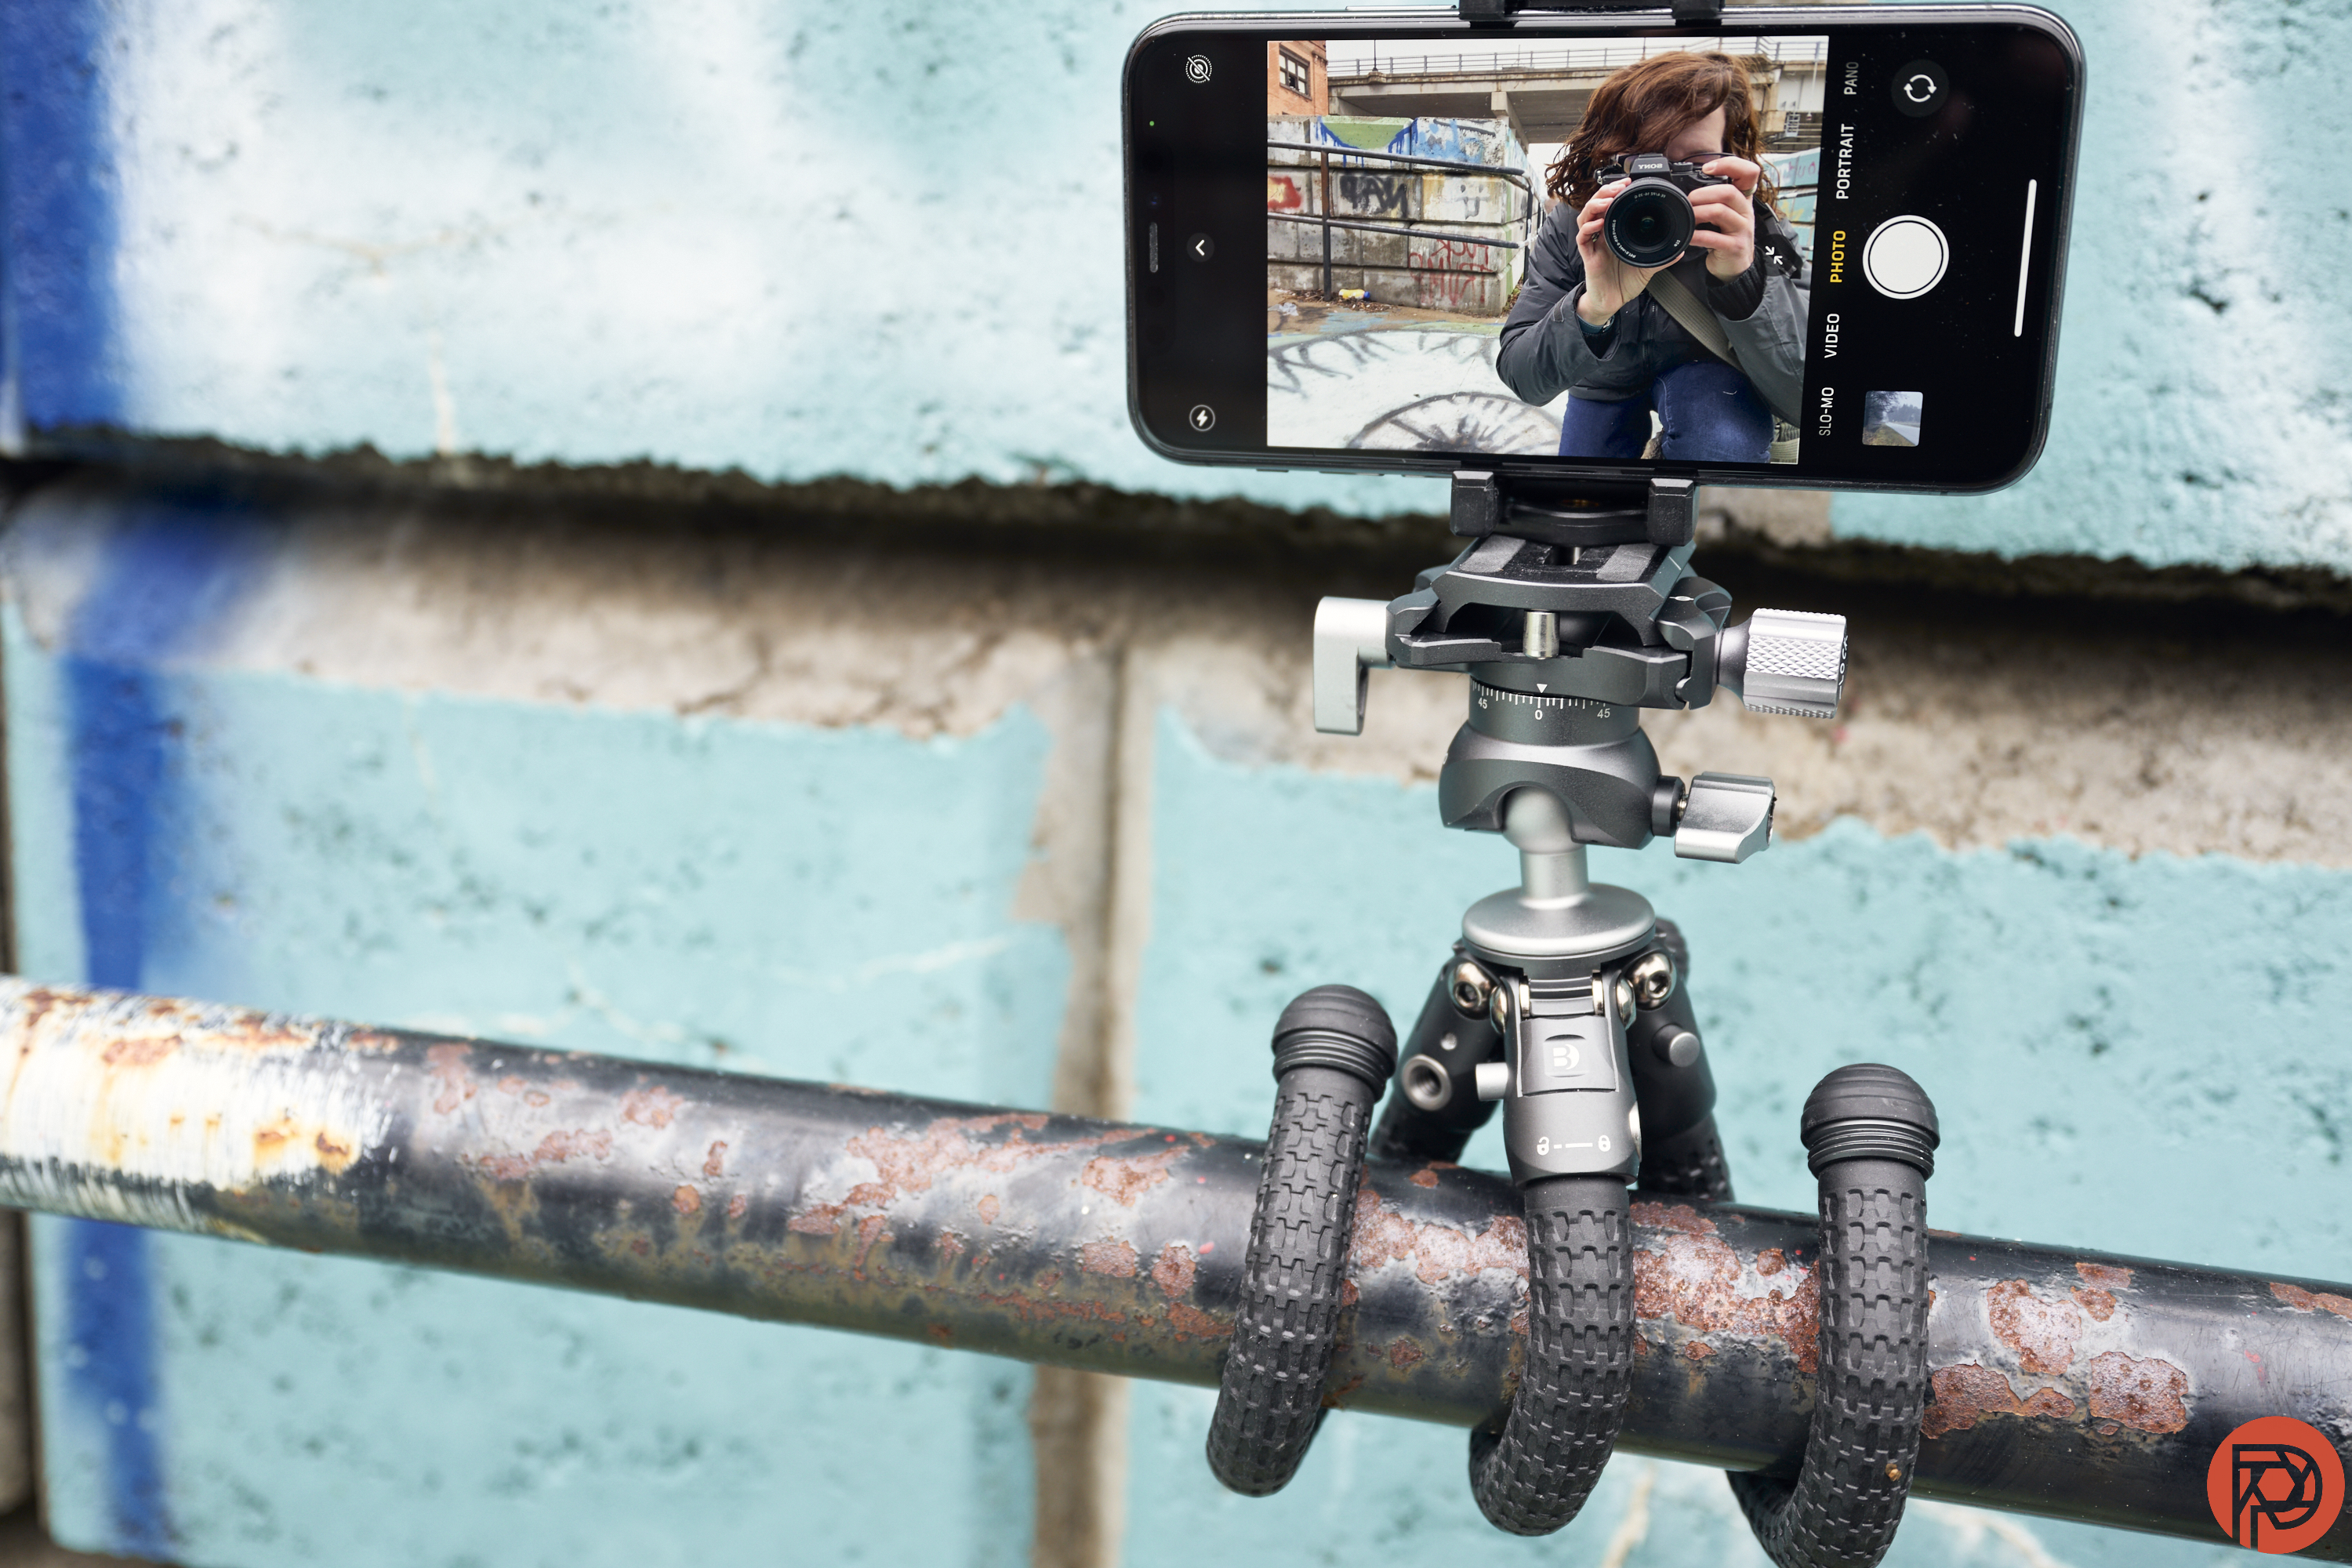 This Is the Revolutionary Spiderman of Tripods: Benro Tablepod Flex Review